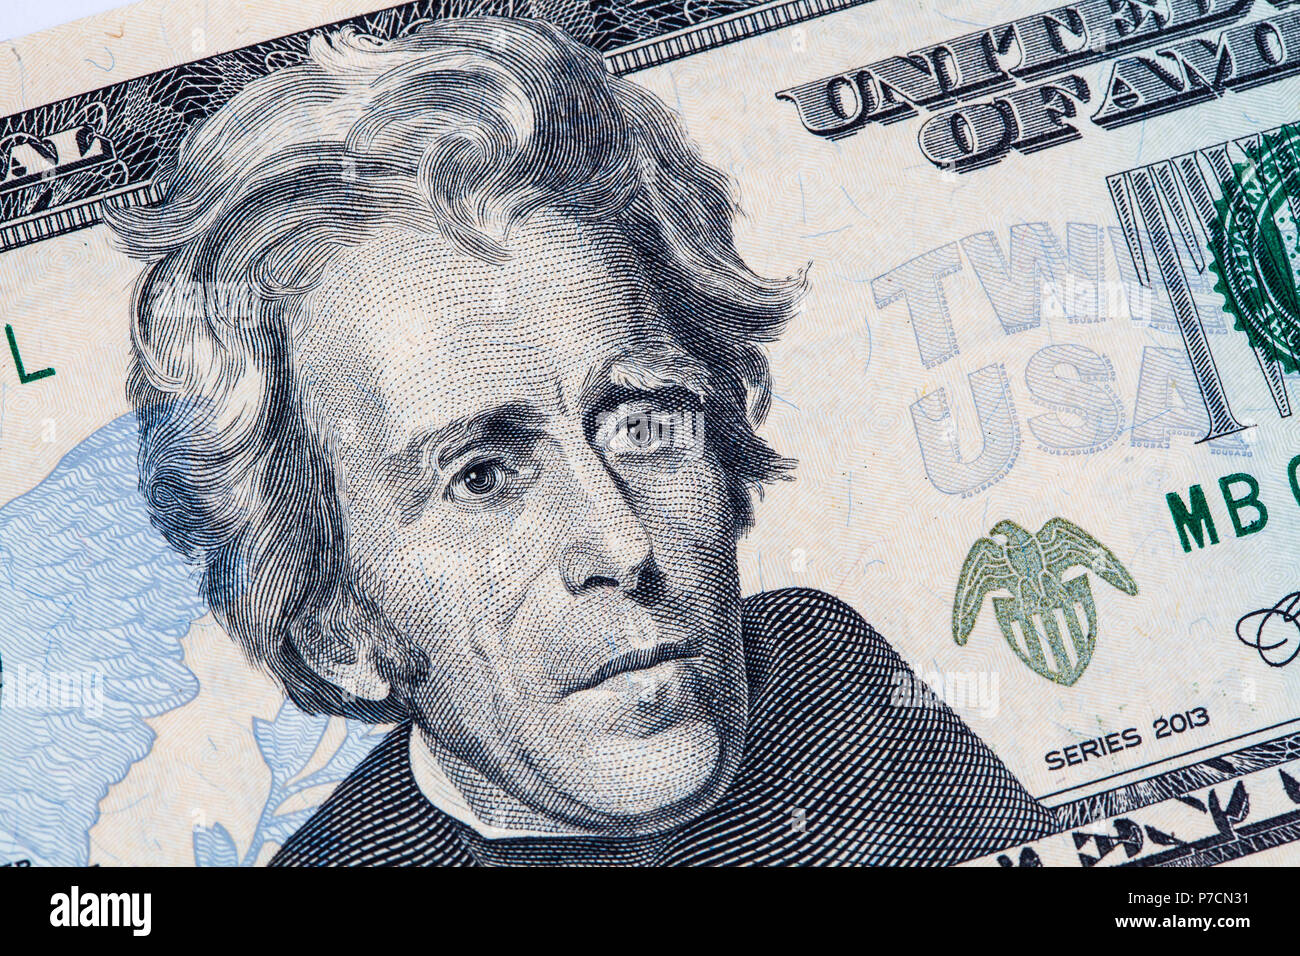 Closeup of Andrew Jackson portrait in perspective on 20 US dollar bill Stock Photo